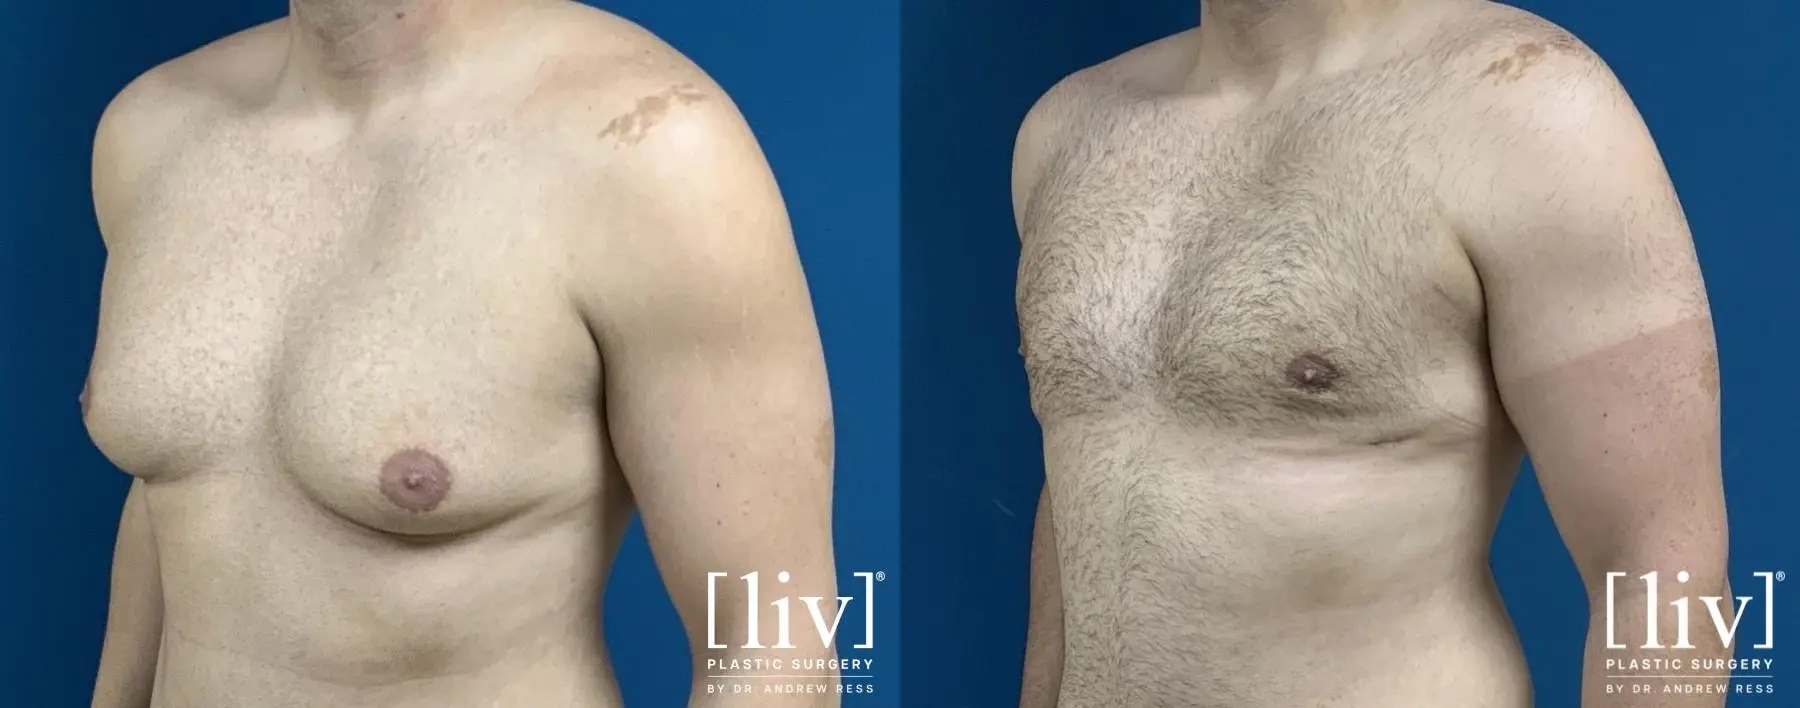 Gynecomastia: Patient 1 - Before and After 2